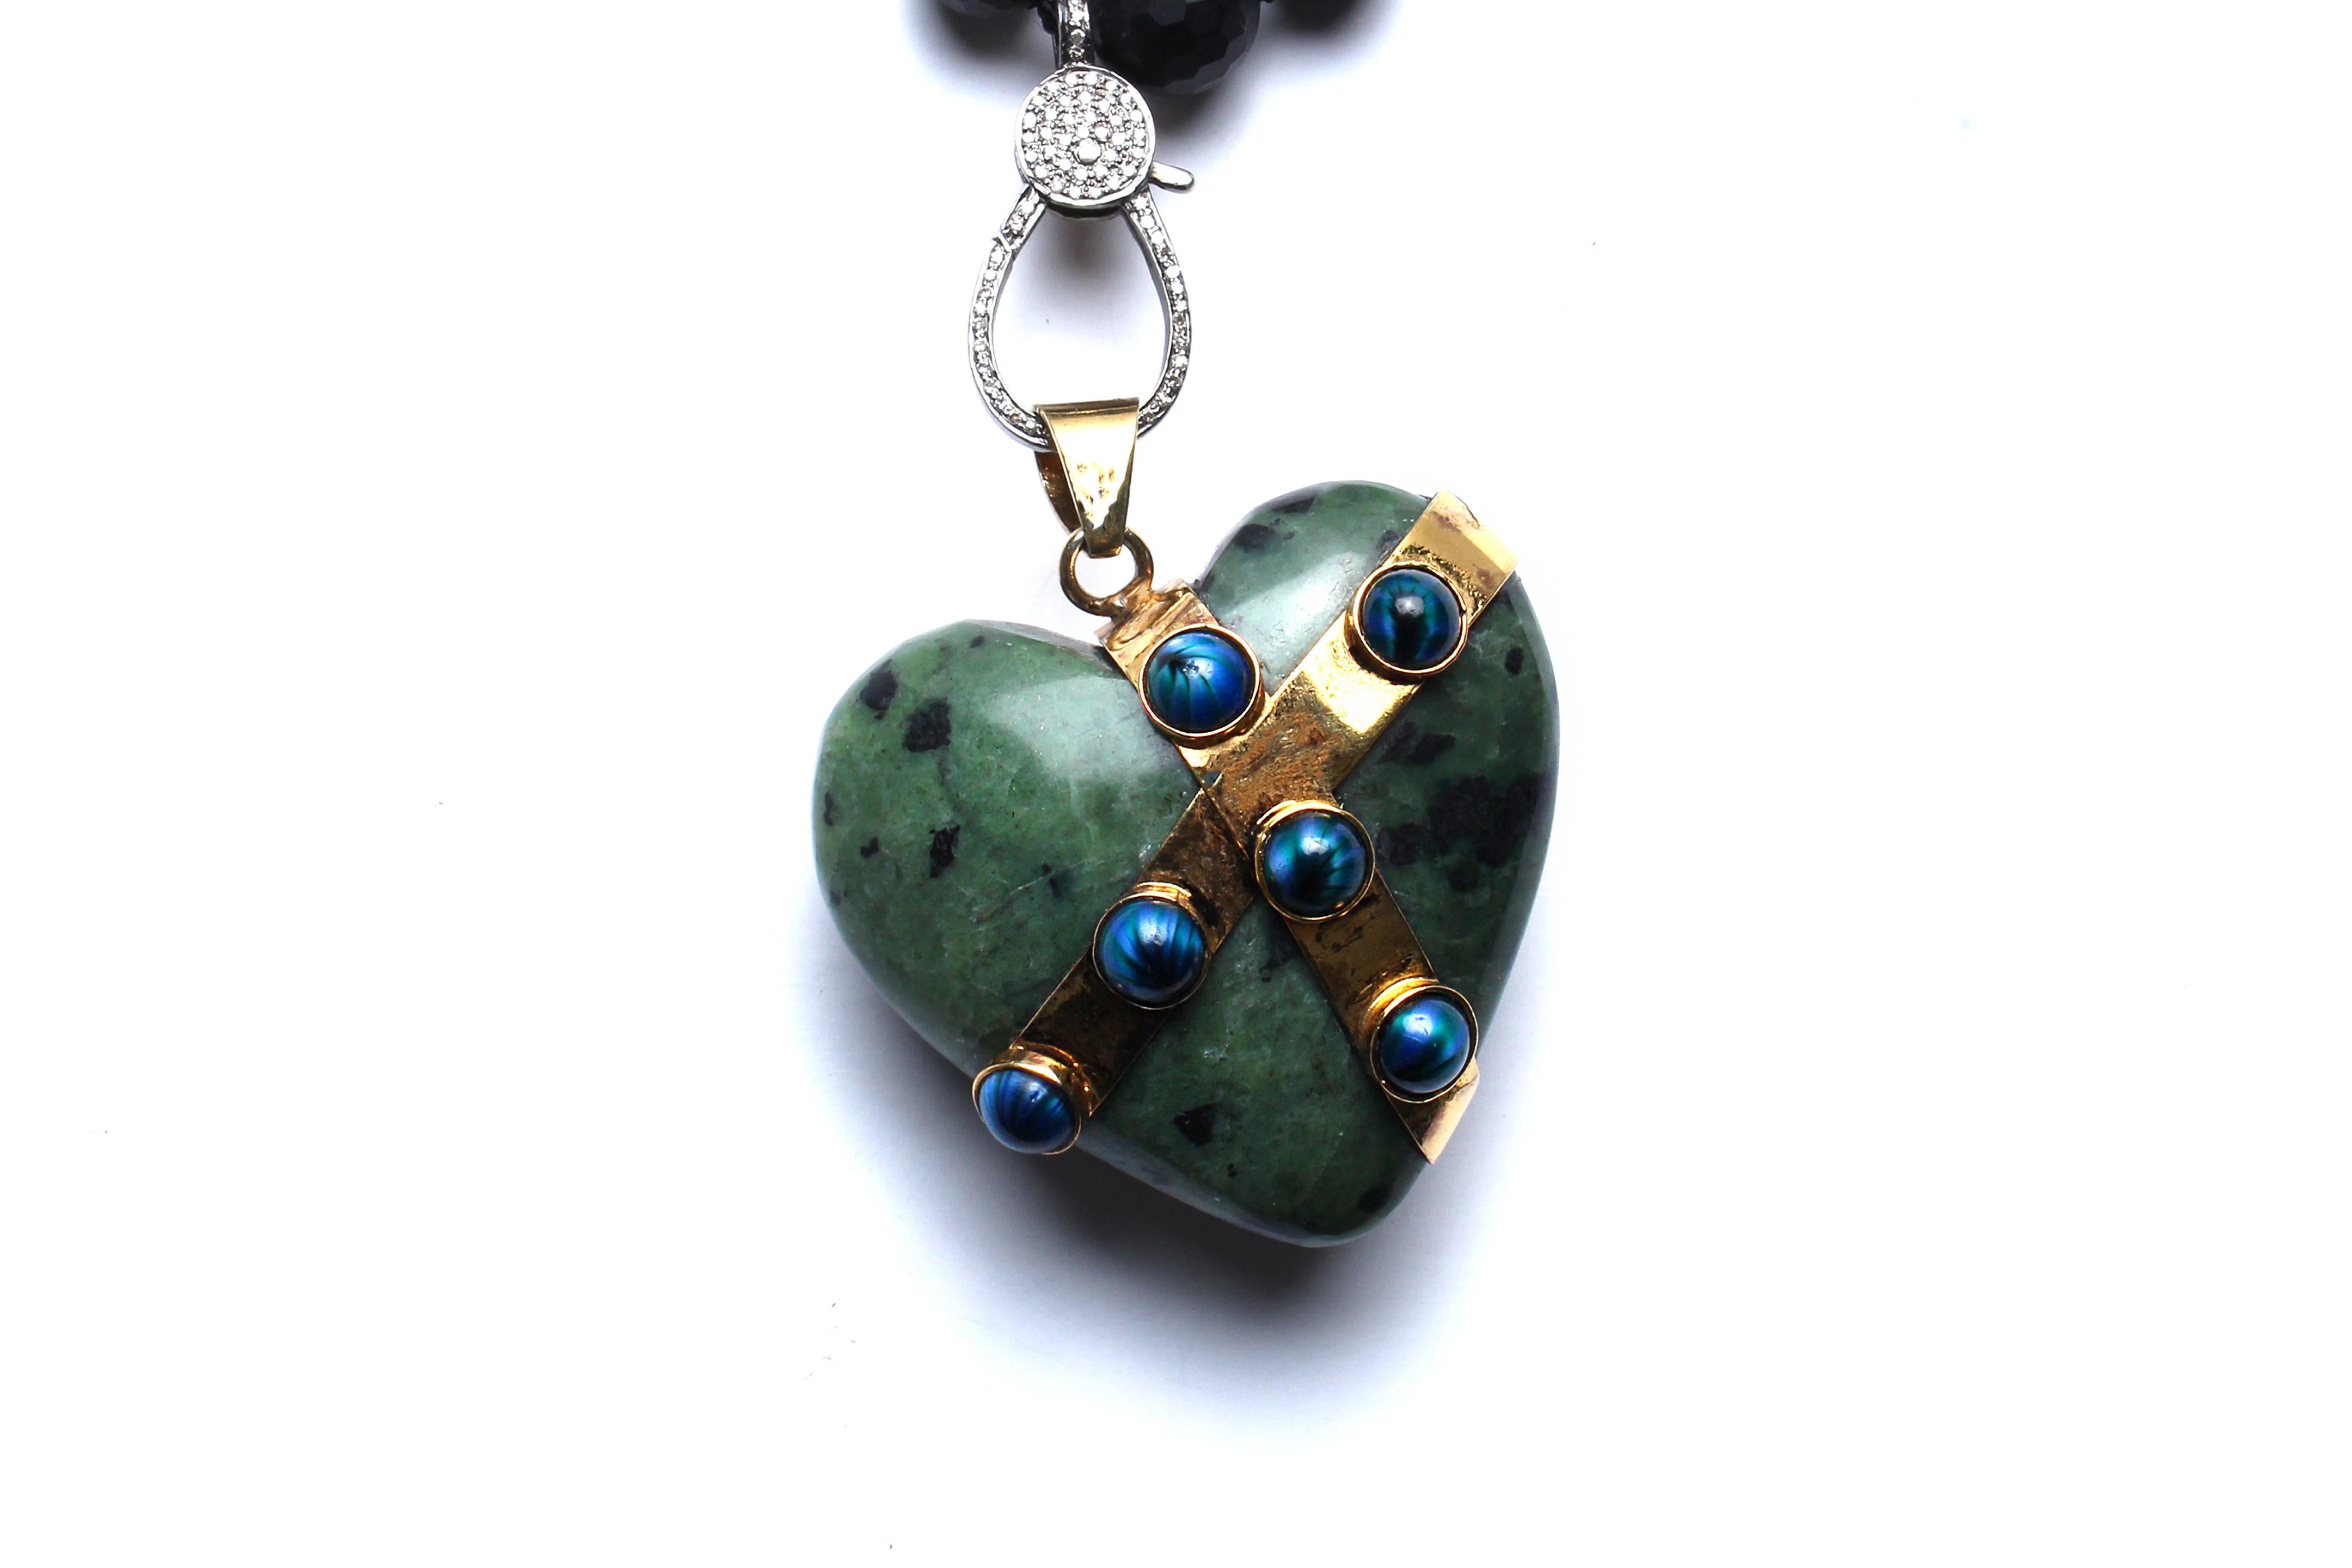 Emerald Cut Clarissa Bronfman Agate Emerald Jade Chalcedony 14k Gold Heart Rosary Necklace For Sale